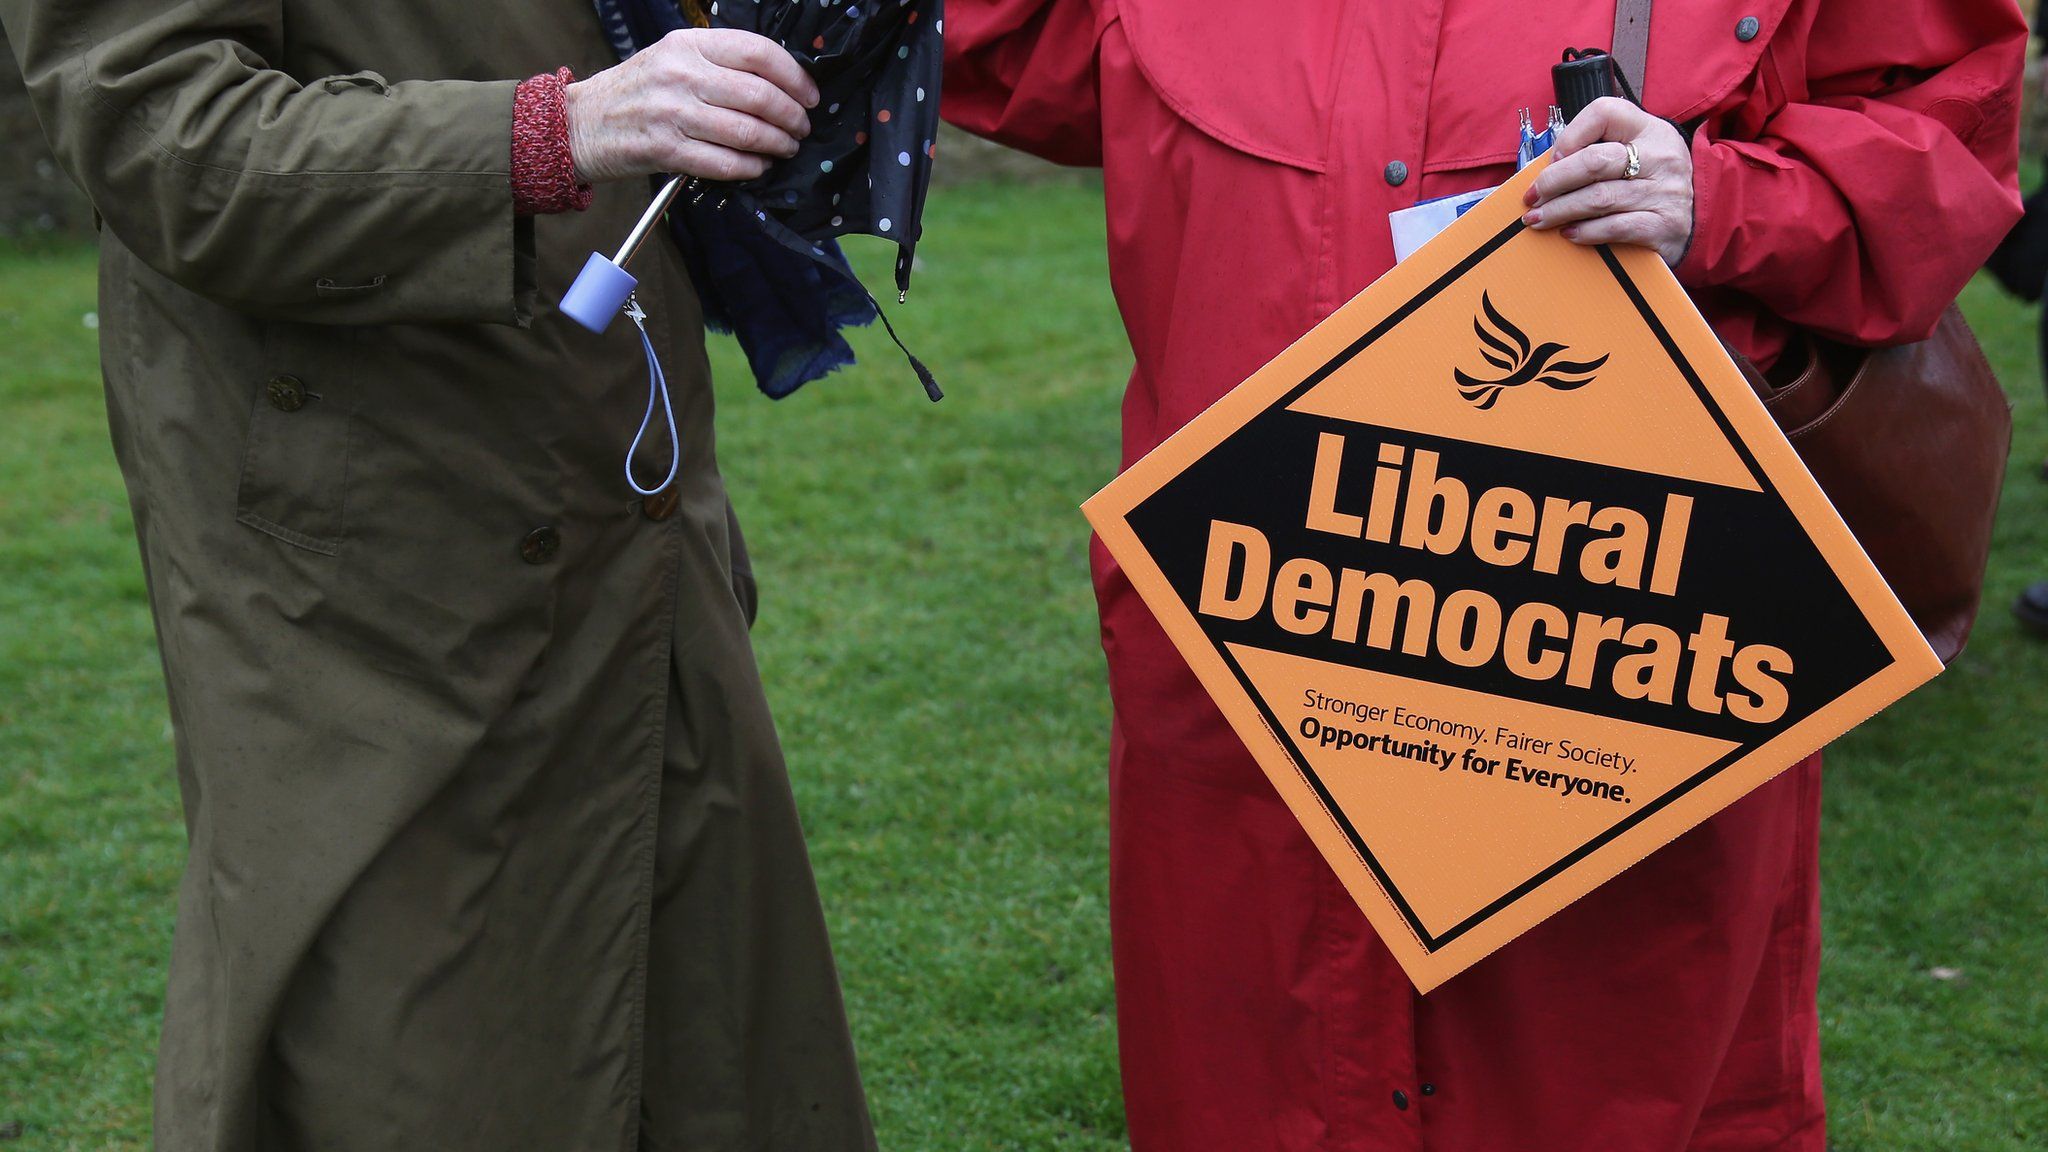 Liberal Democrat placard and supporters